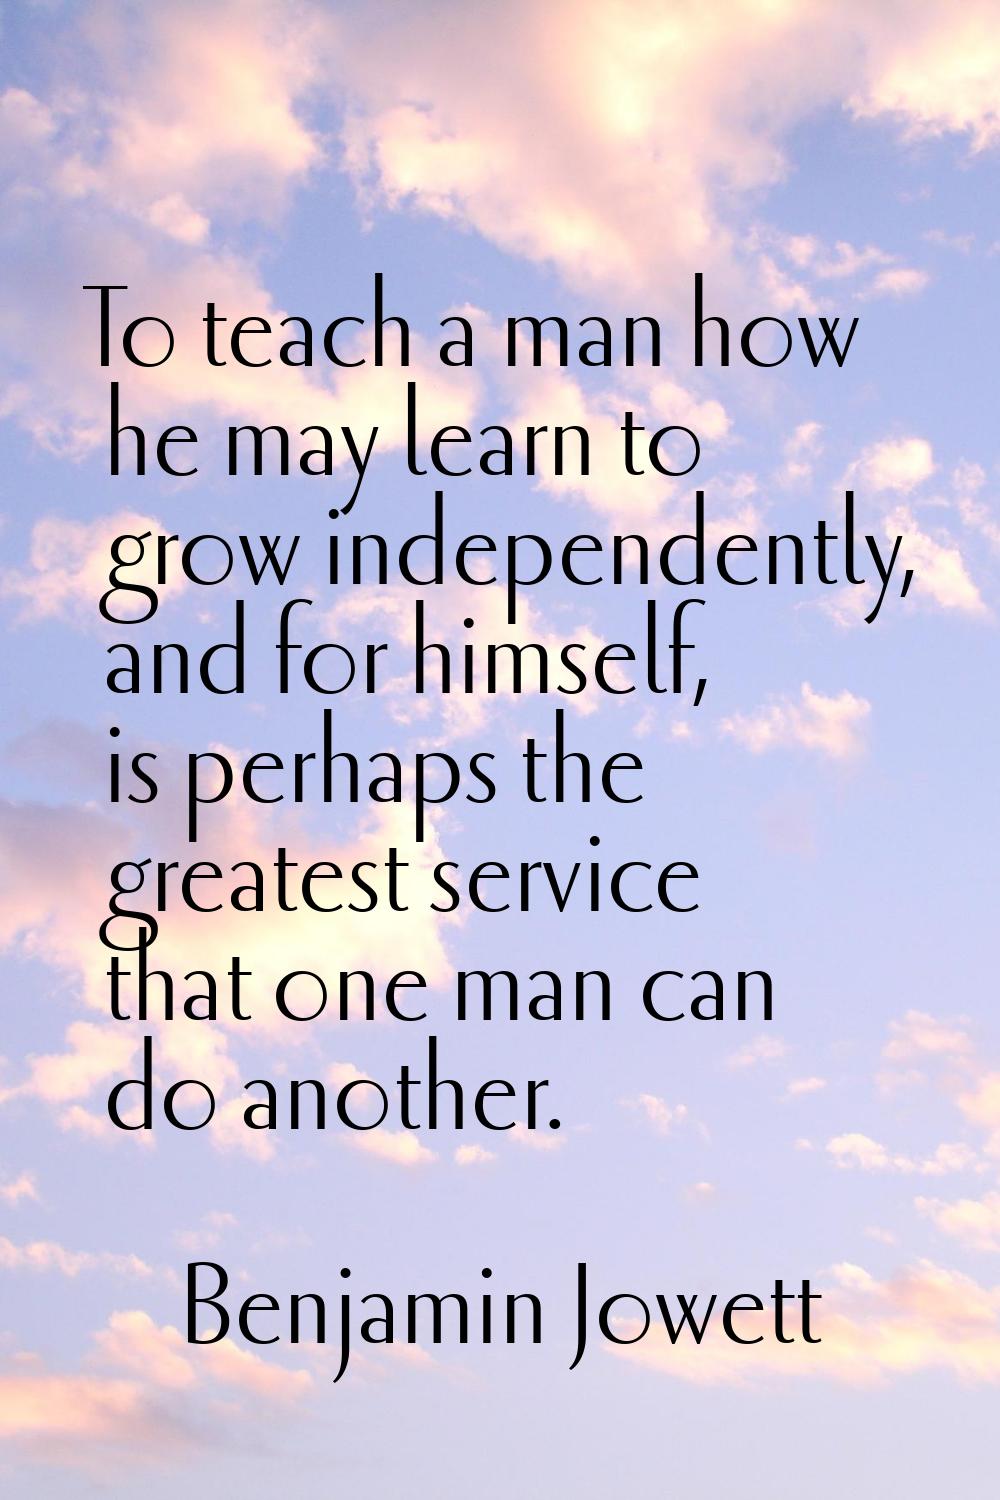 To teach a man how he may learn to grow independently, and for himself, is perhaps the greatest ser